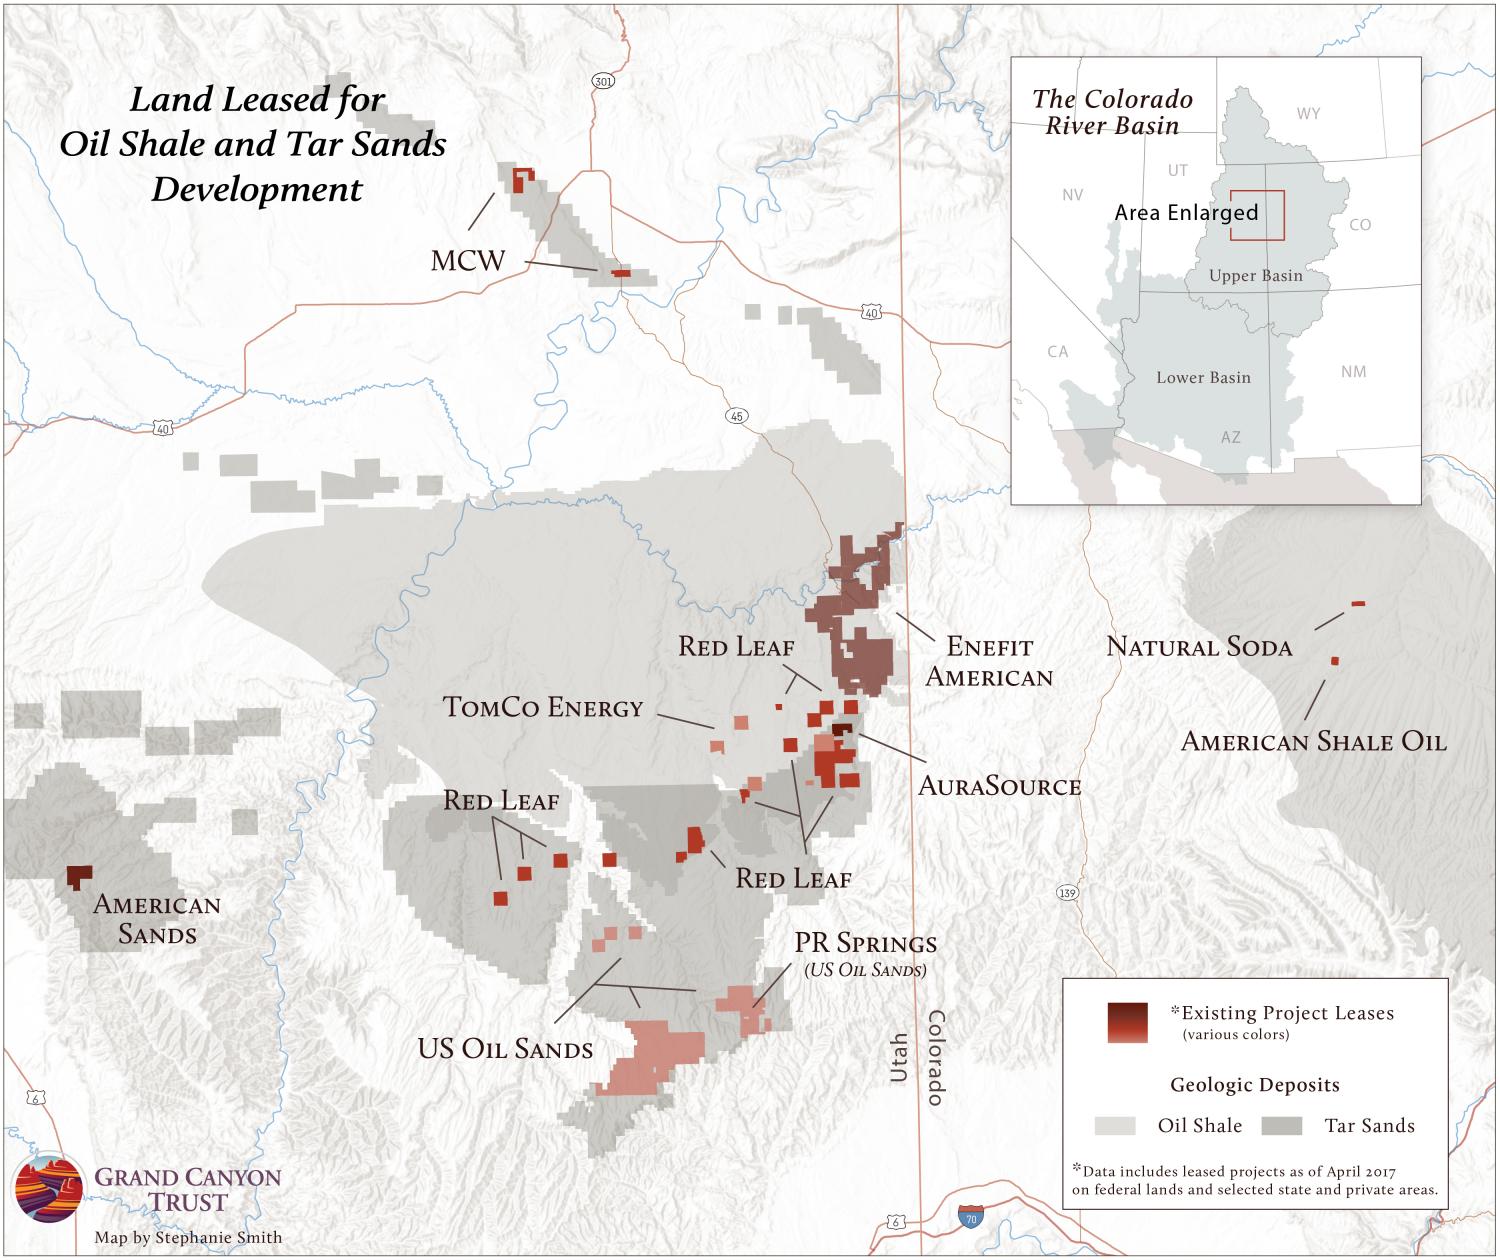 Map of land leased for oil shale and tar sands development